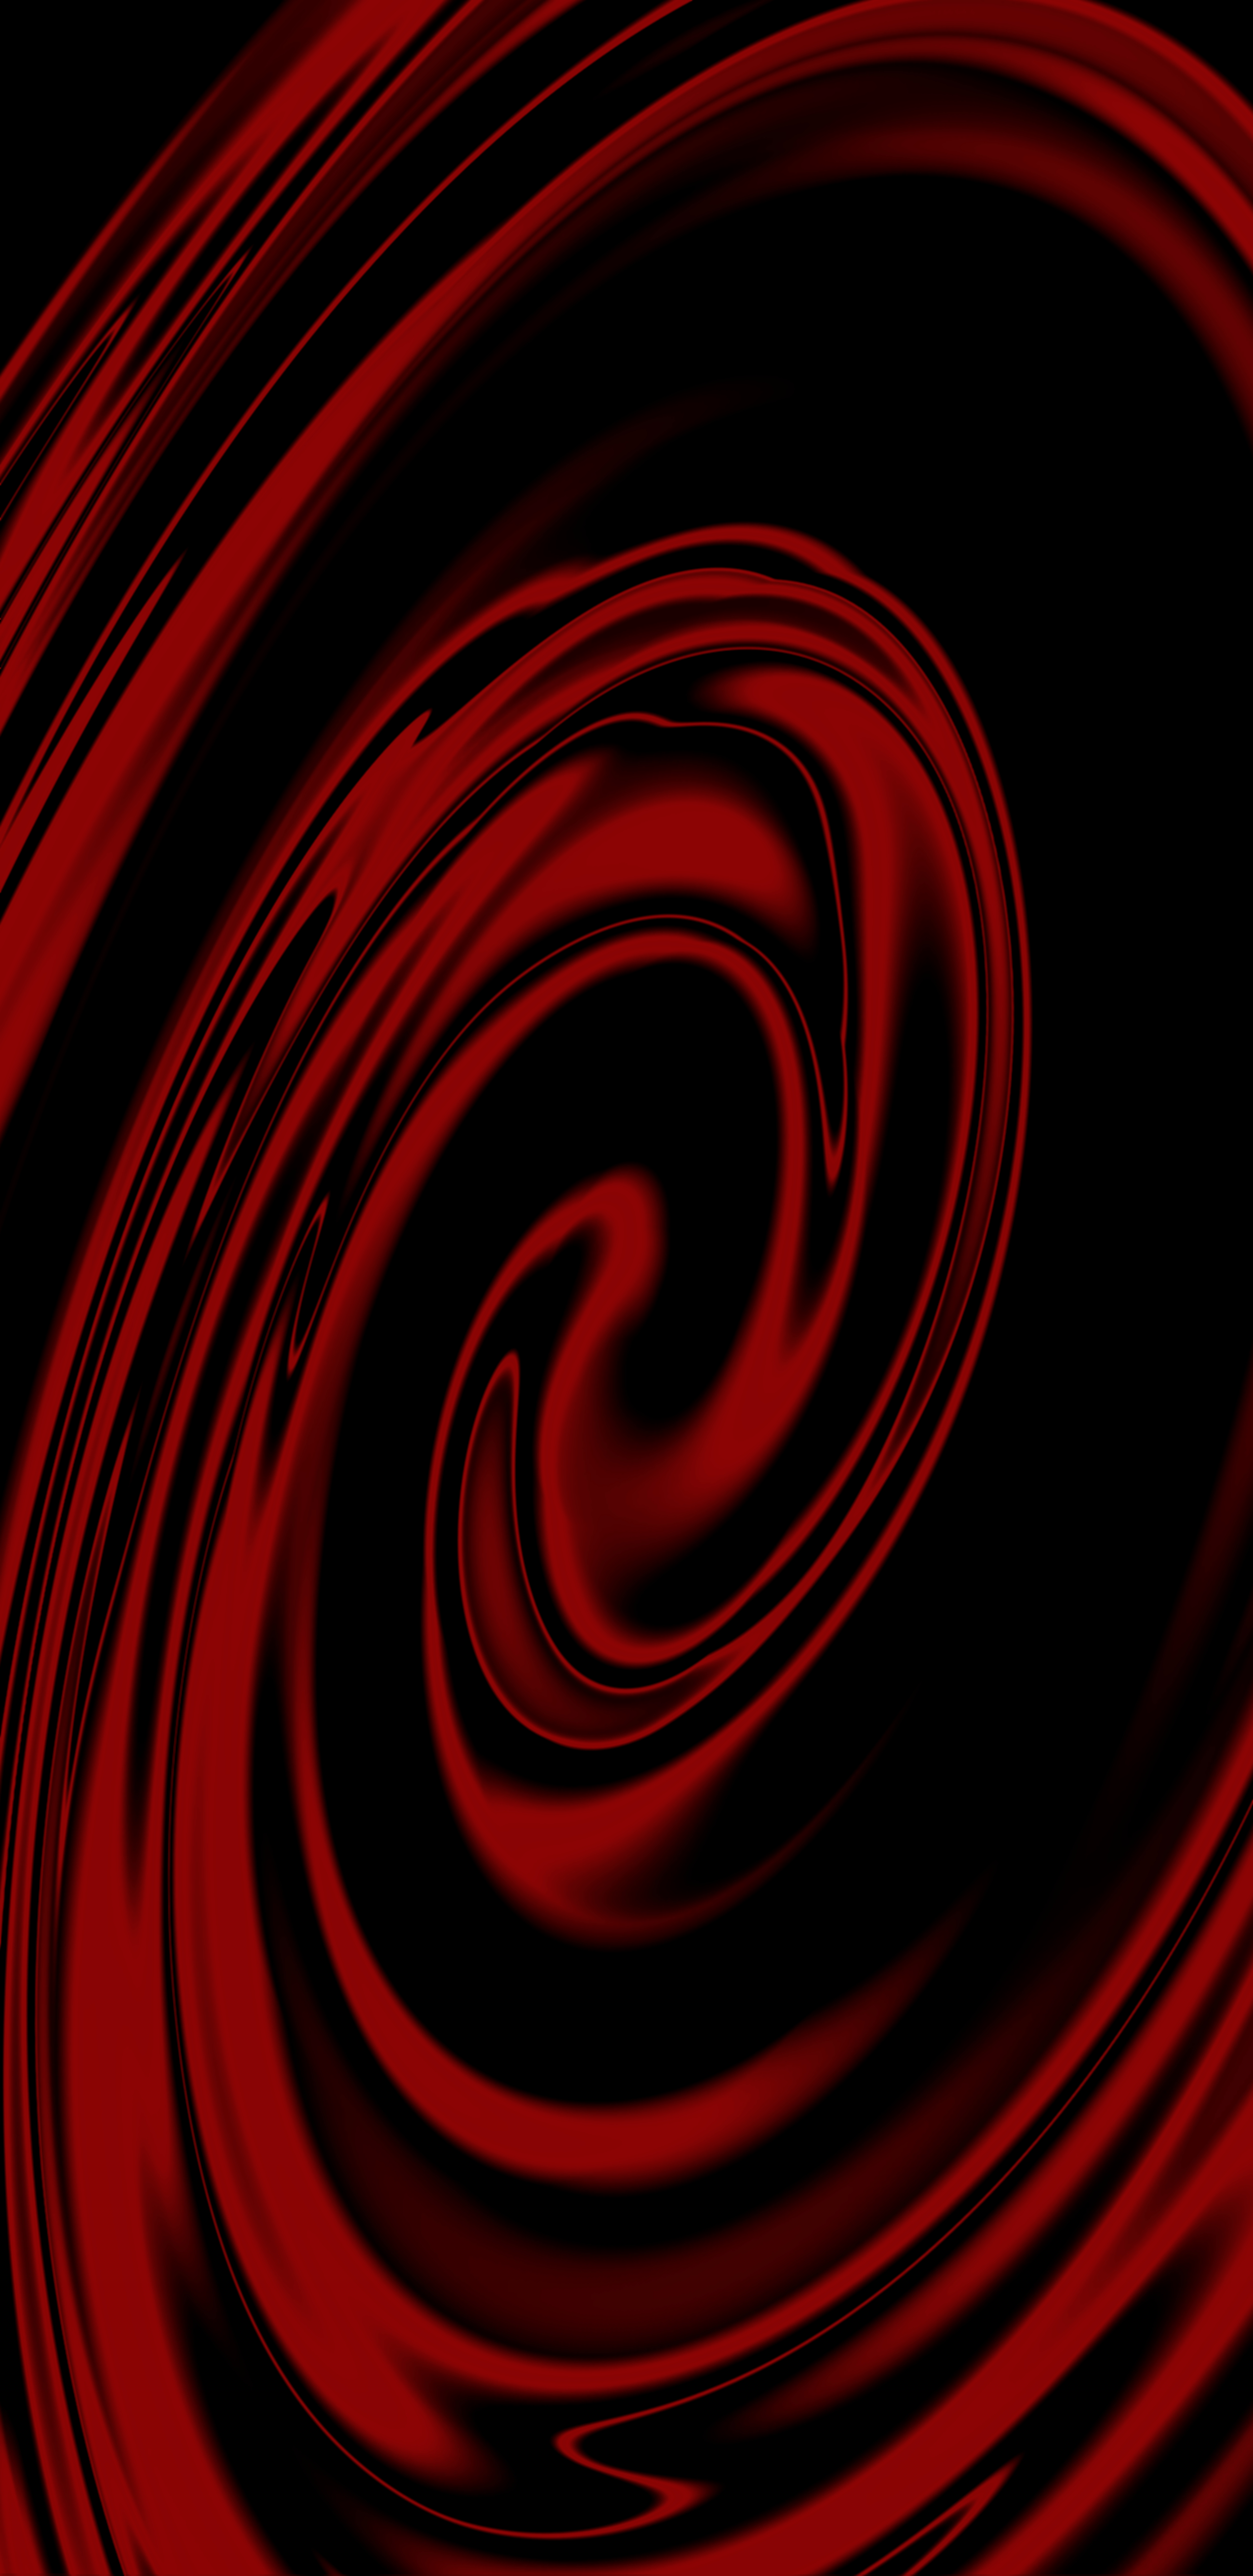 involute, abstract, black, red, spiral, swirling cell phone wallpapers